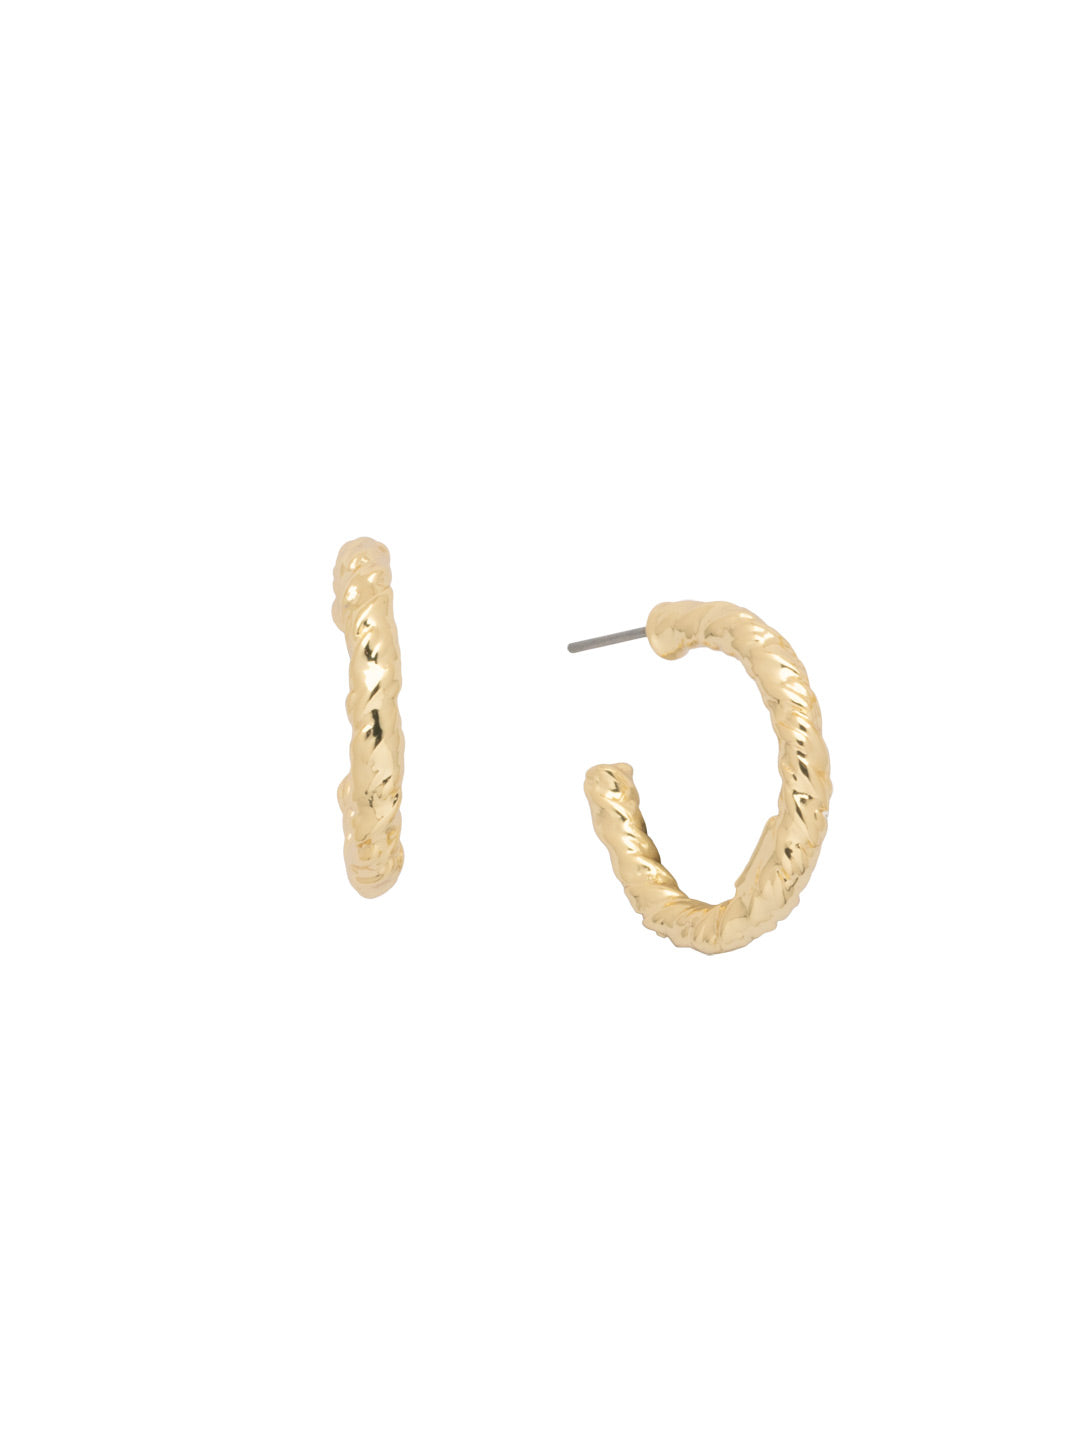 Olive Hoop Earrings - 4EFJ13BGMTL - <p>The Olive Hoop Earrings resemble a textured rope chain, secured on a classic post back. From Sorrelli's Bare Metallic collection in our Bright Gold-tone finish.</p>